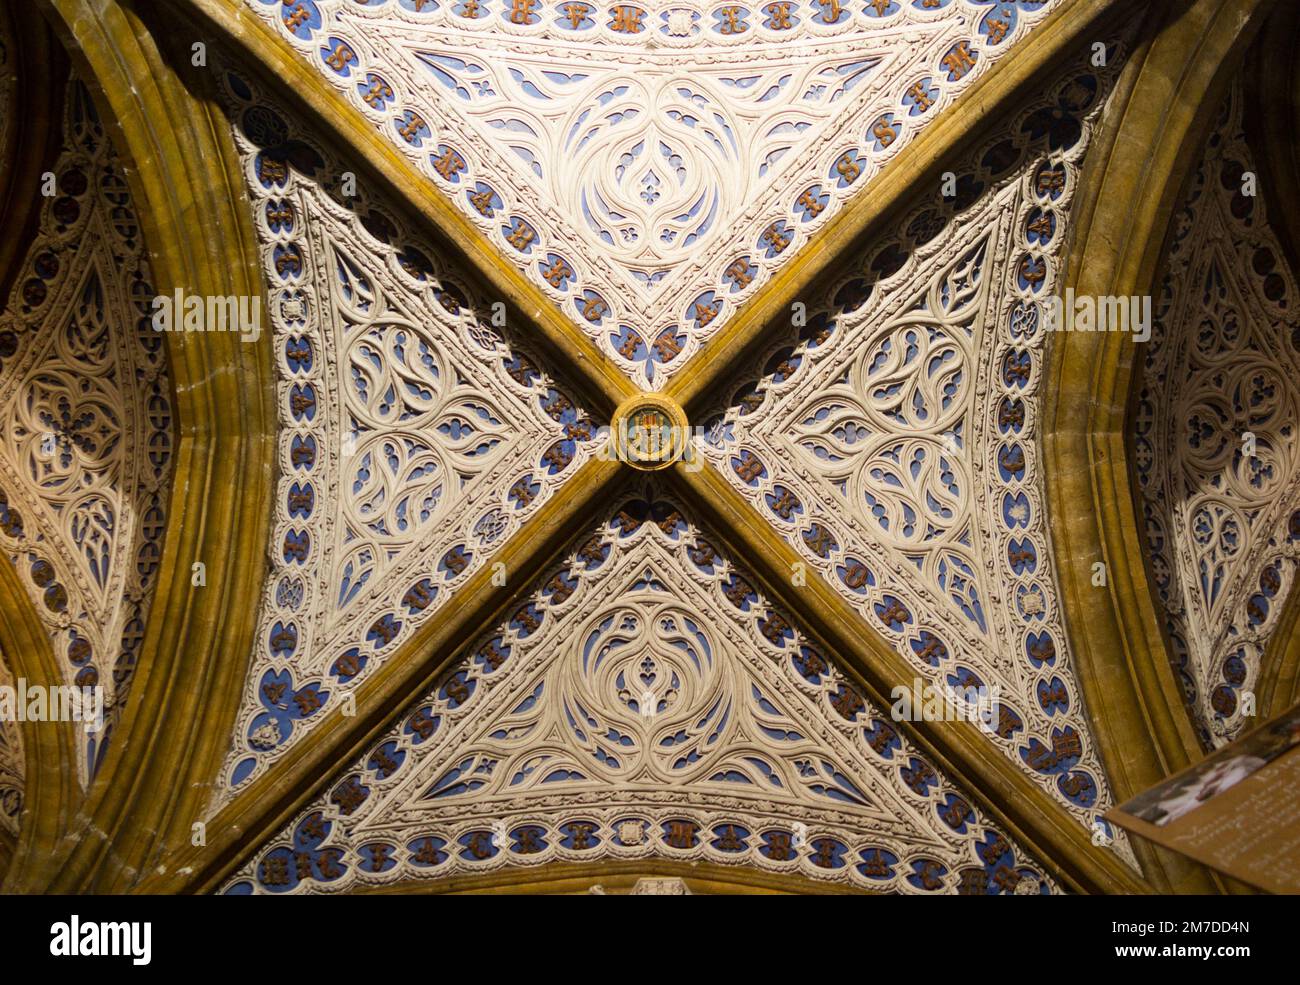 Vaulted and decorated ceiling just inside the main entrance of Abbey-church of Hautecombe Abbey, a former Cistercian monastery, later a Benedictine monastery, in Saint-Pierre-de-Curtille near Aix-les-Bains in Savoy / Savoie. France. (133) Stock Photo